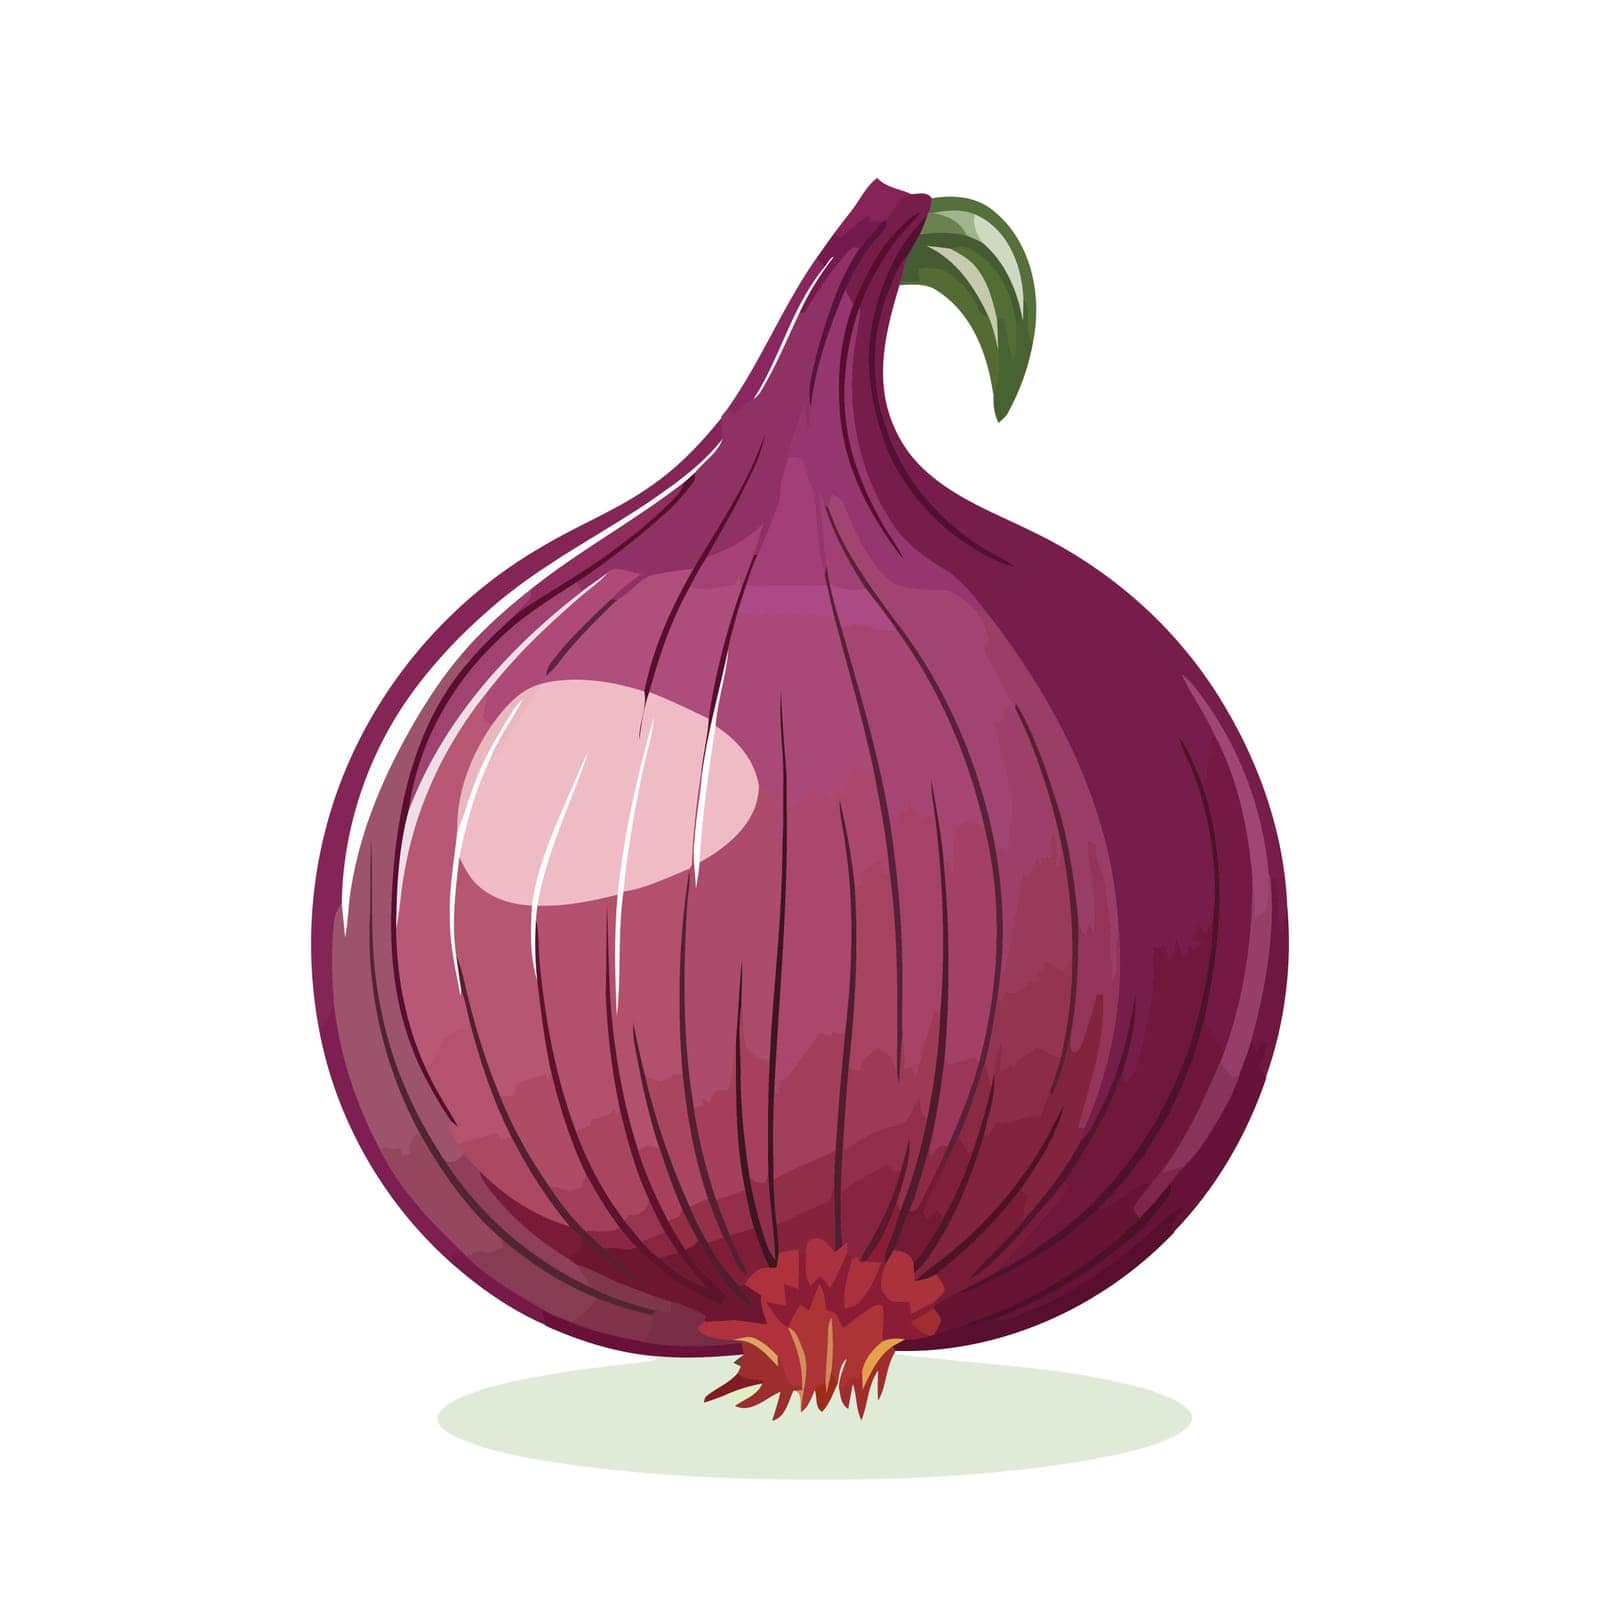 Onion icon. Onion image isolated. Onion sign in flat design. Vector illustration